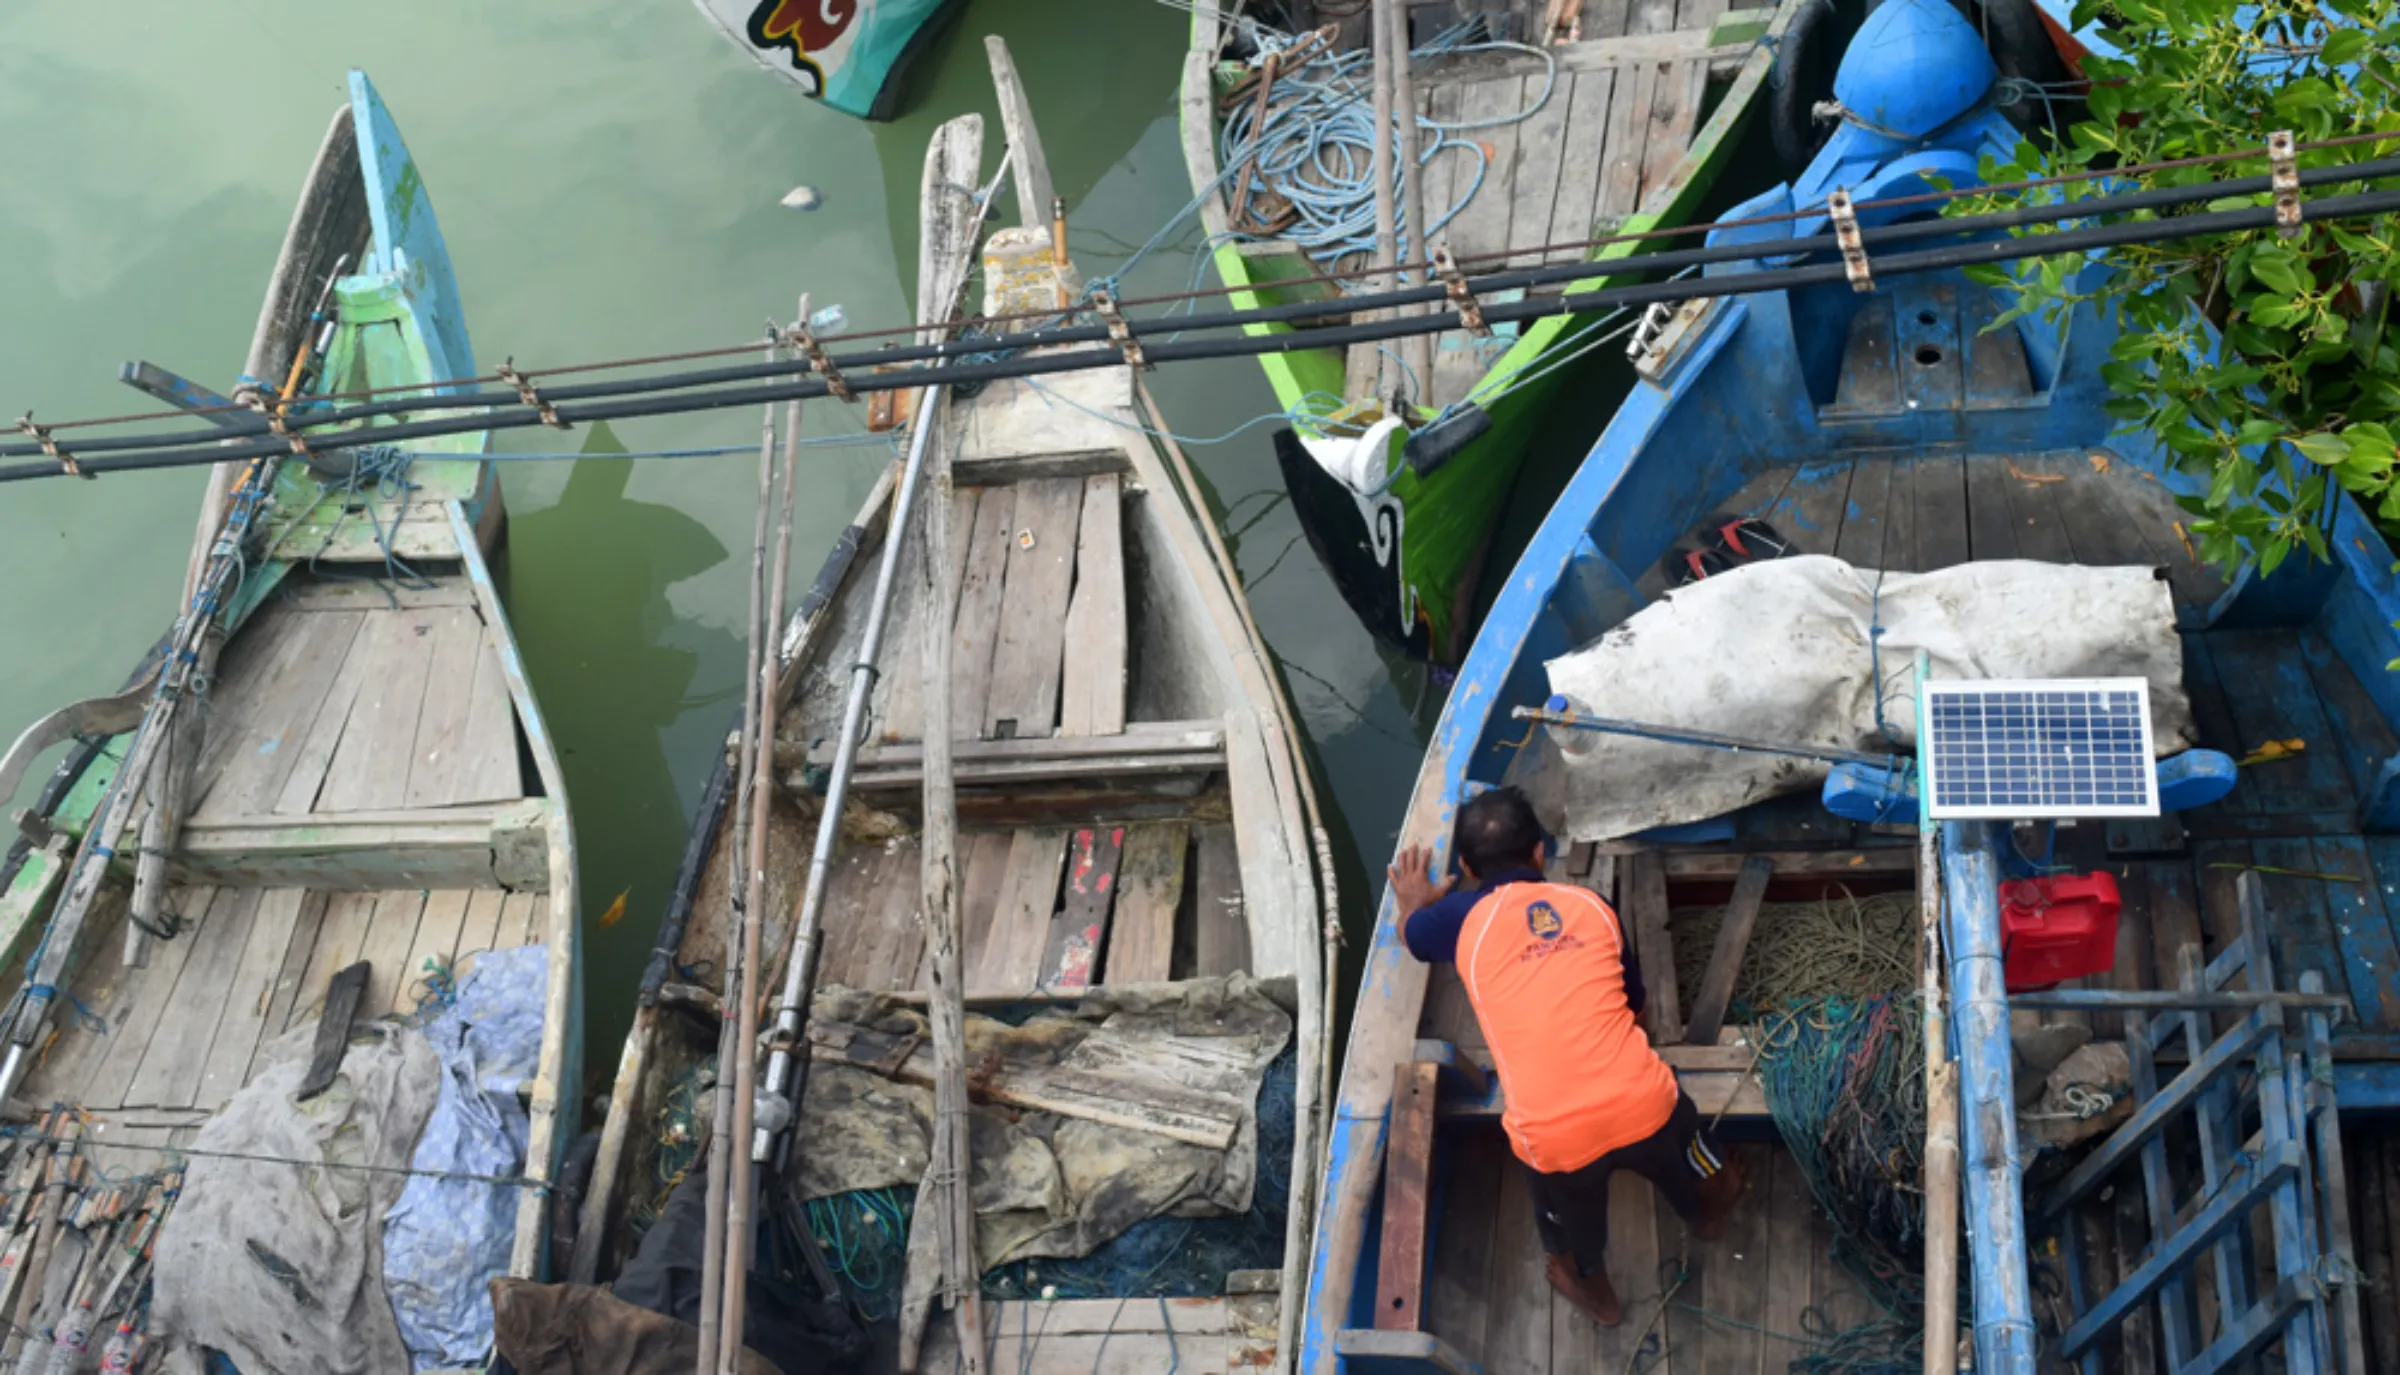 A fisherman checks the condition of a boat on the Karanggeneng River, in Central Java, Indonesia, August 12, 2022